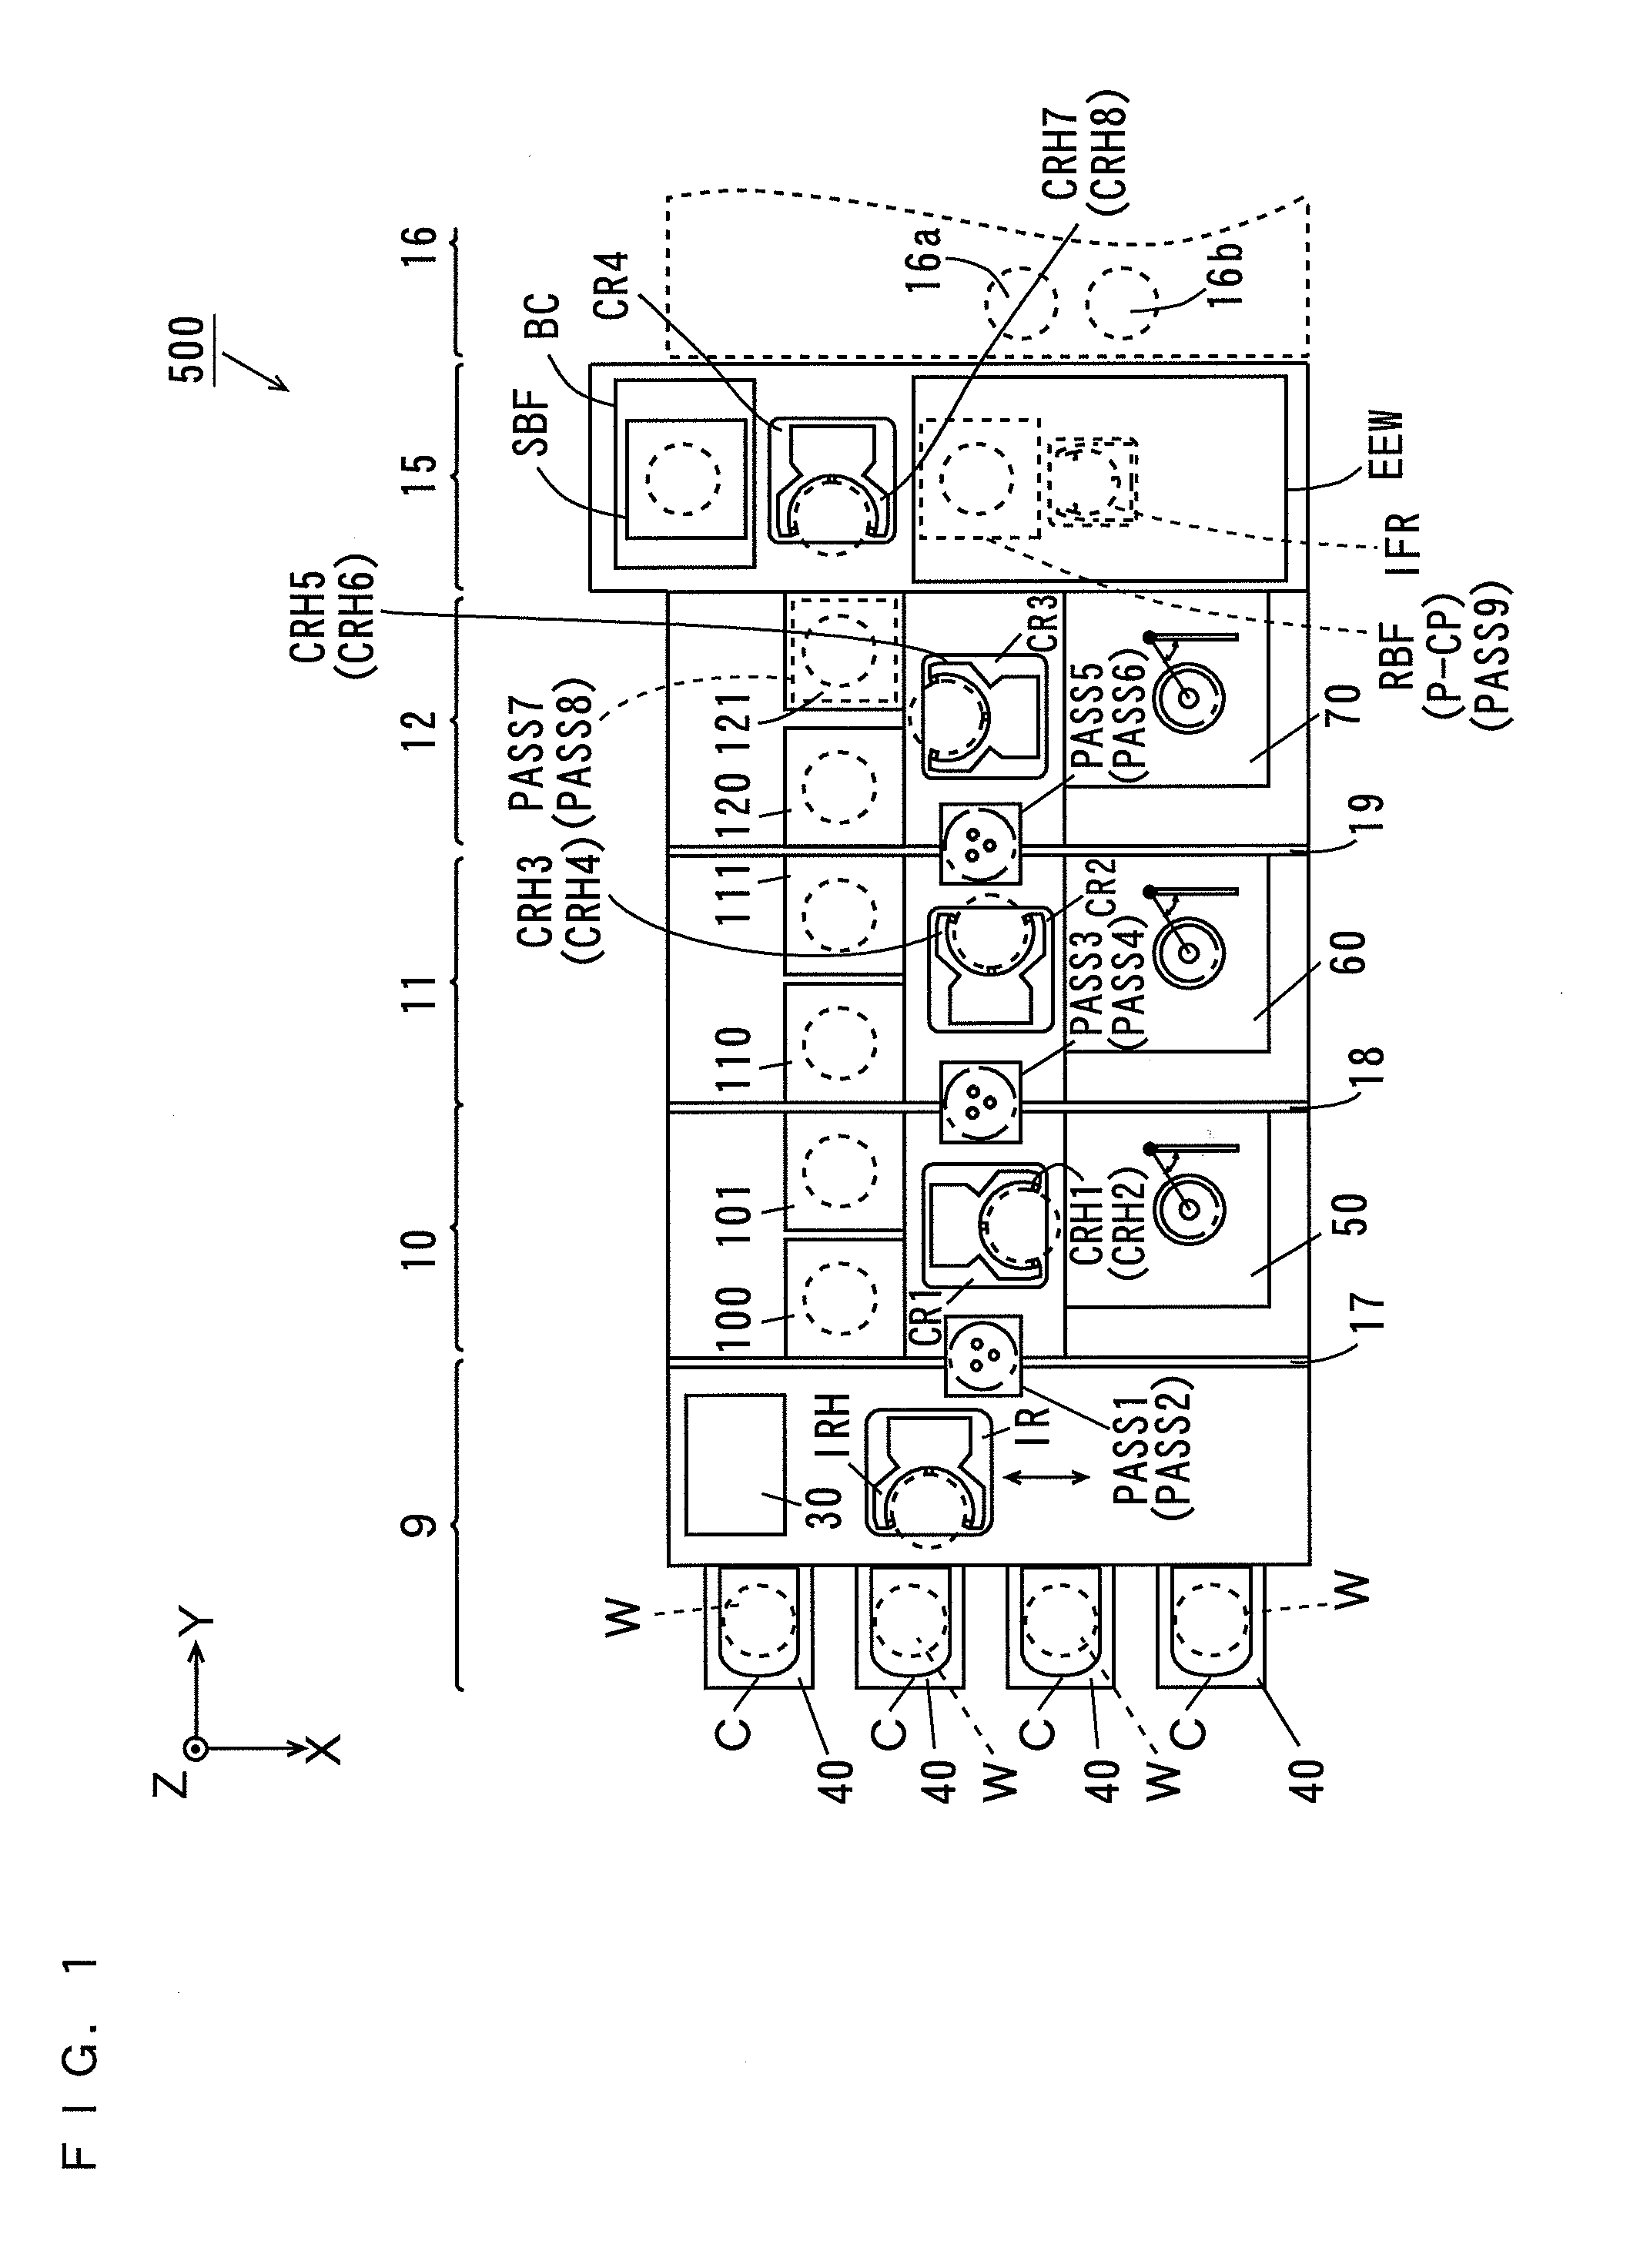 Substrate cleaning apparatus and substrate processing apparatus including the substrate cleaning apparatus